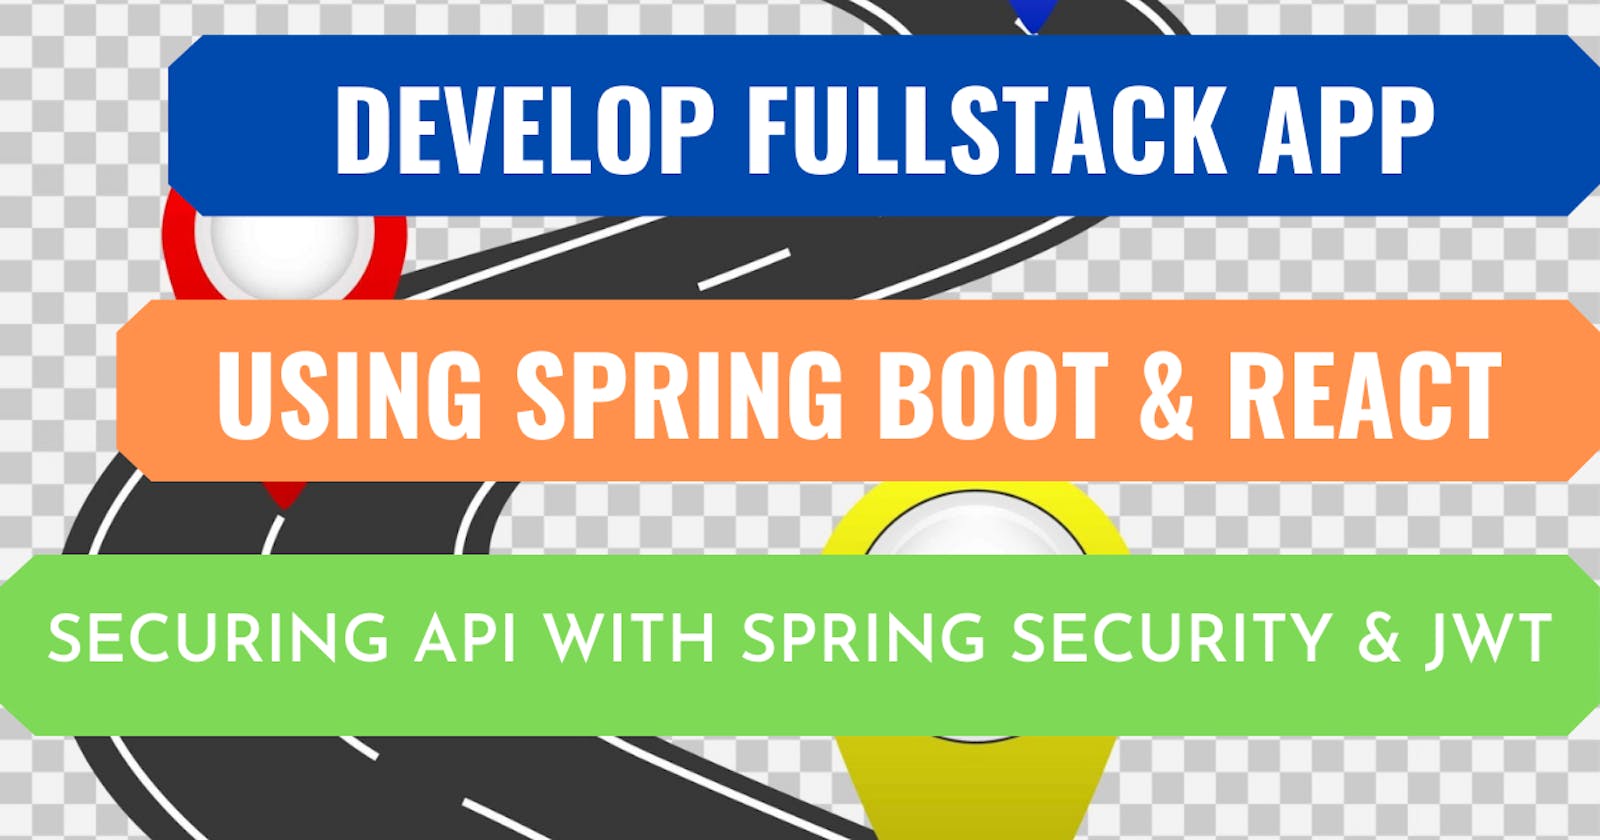 Java FullStack Spring boot & React app: Backend REST API / 3 - Securing the REST API with Spring Security & JWT (a)